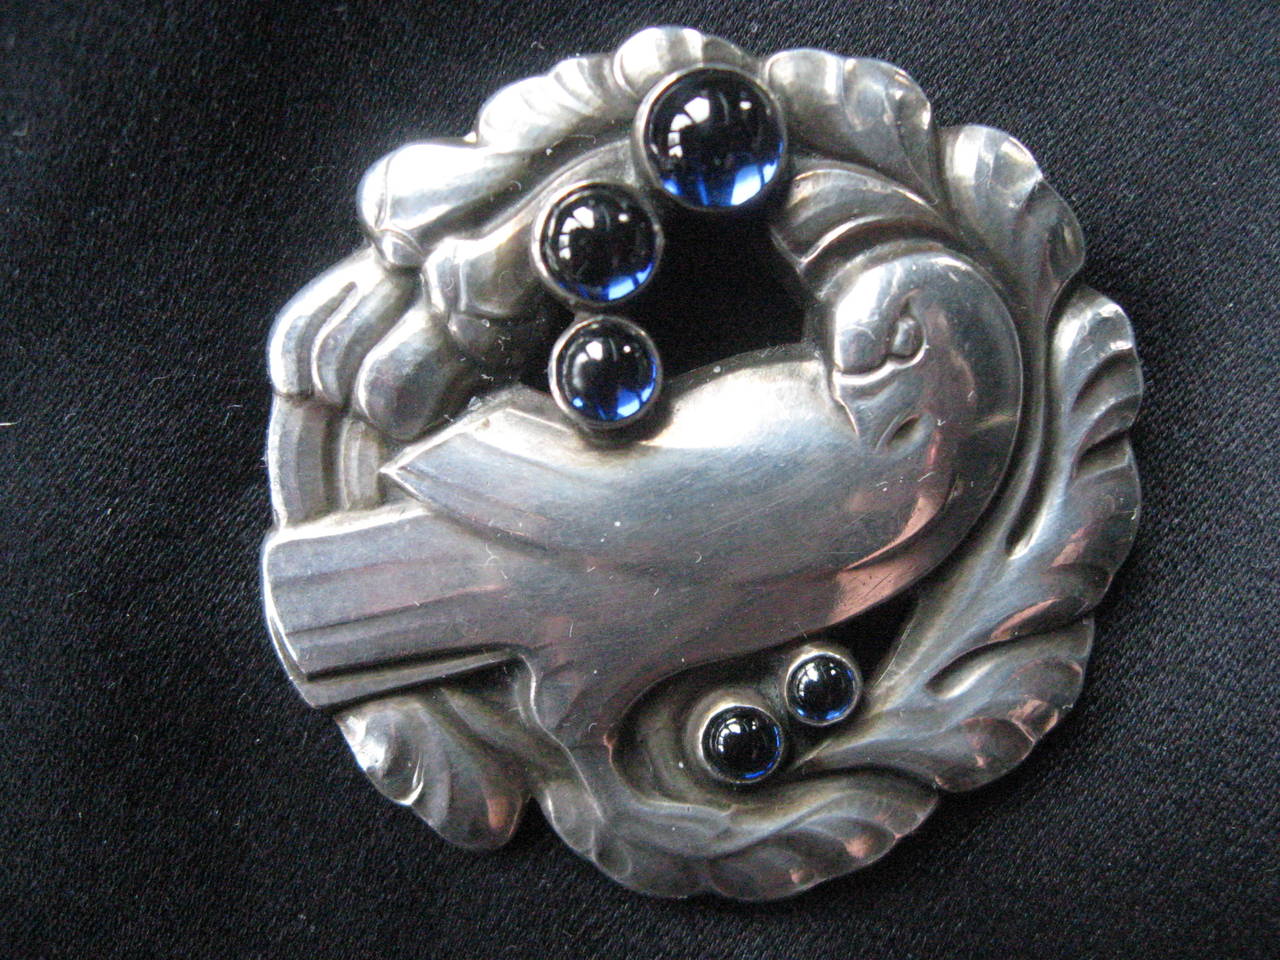 1940's George Jensen Sterling Dove Pin and Earrings with Blue Stones
Pin Diameter 1.5" 